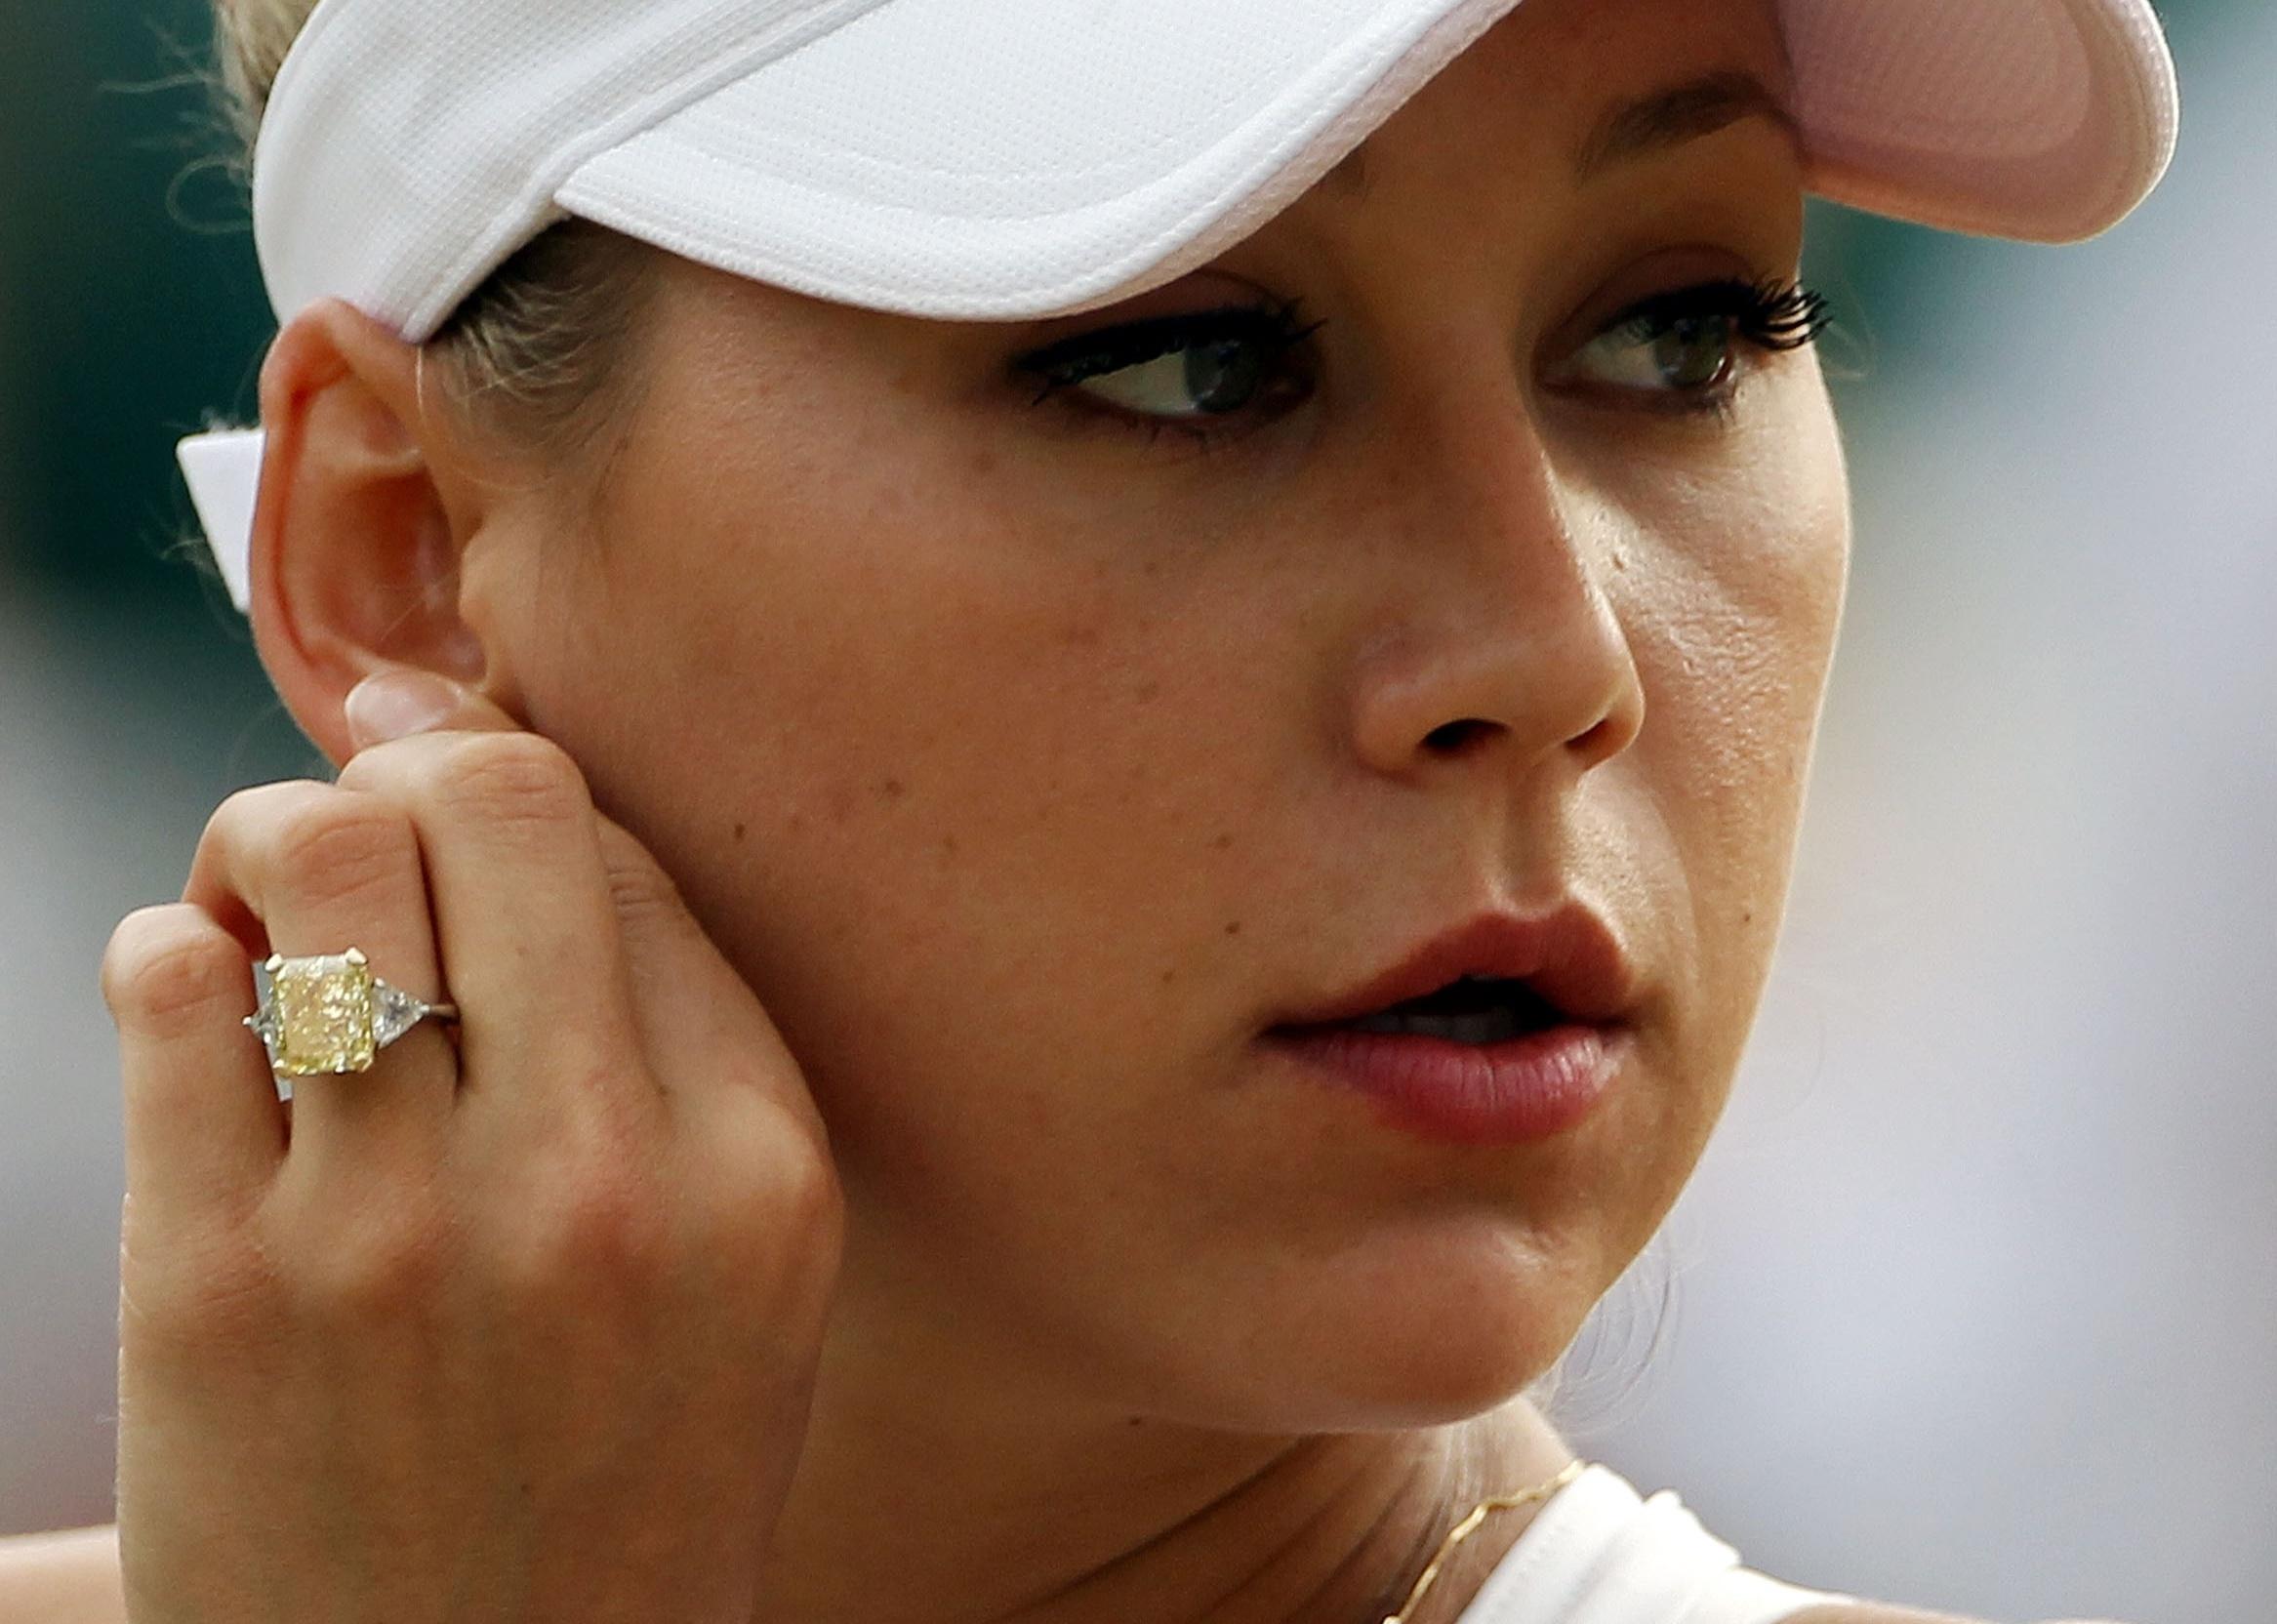 Anna Kournikova, in all white tennis gear, shows off her yellow engagement ring.